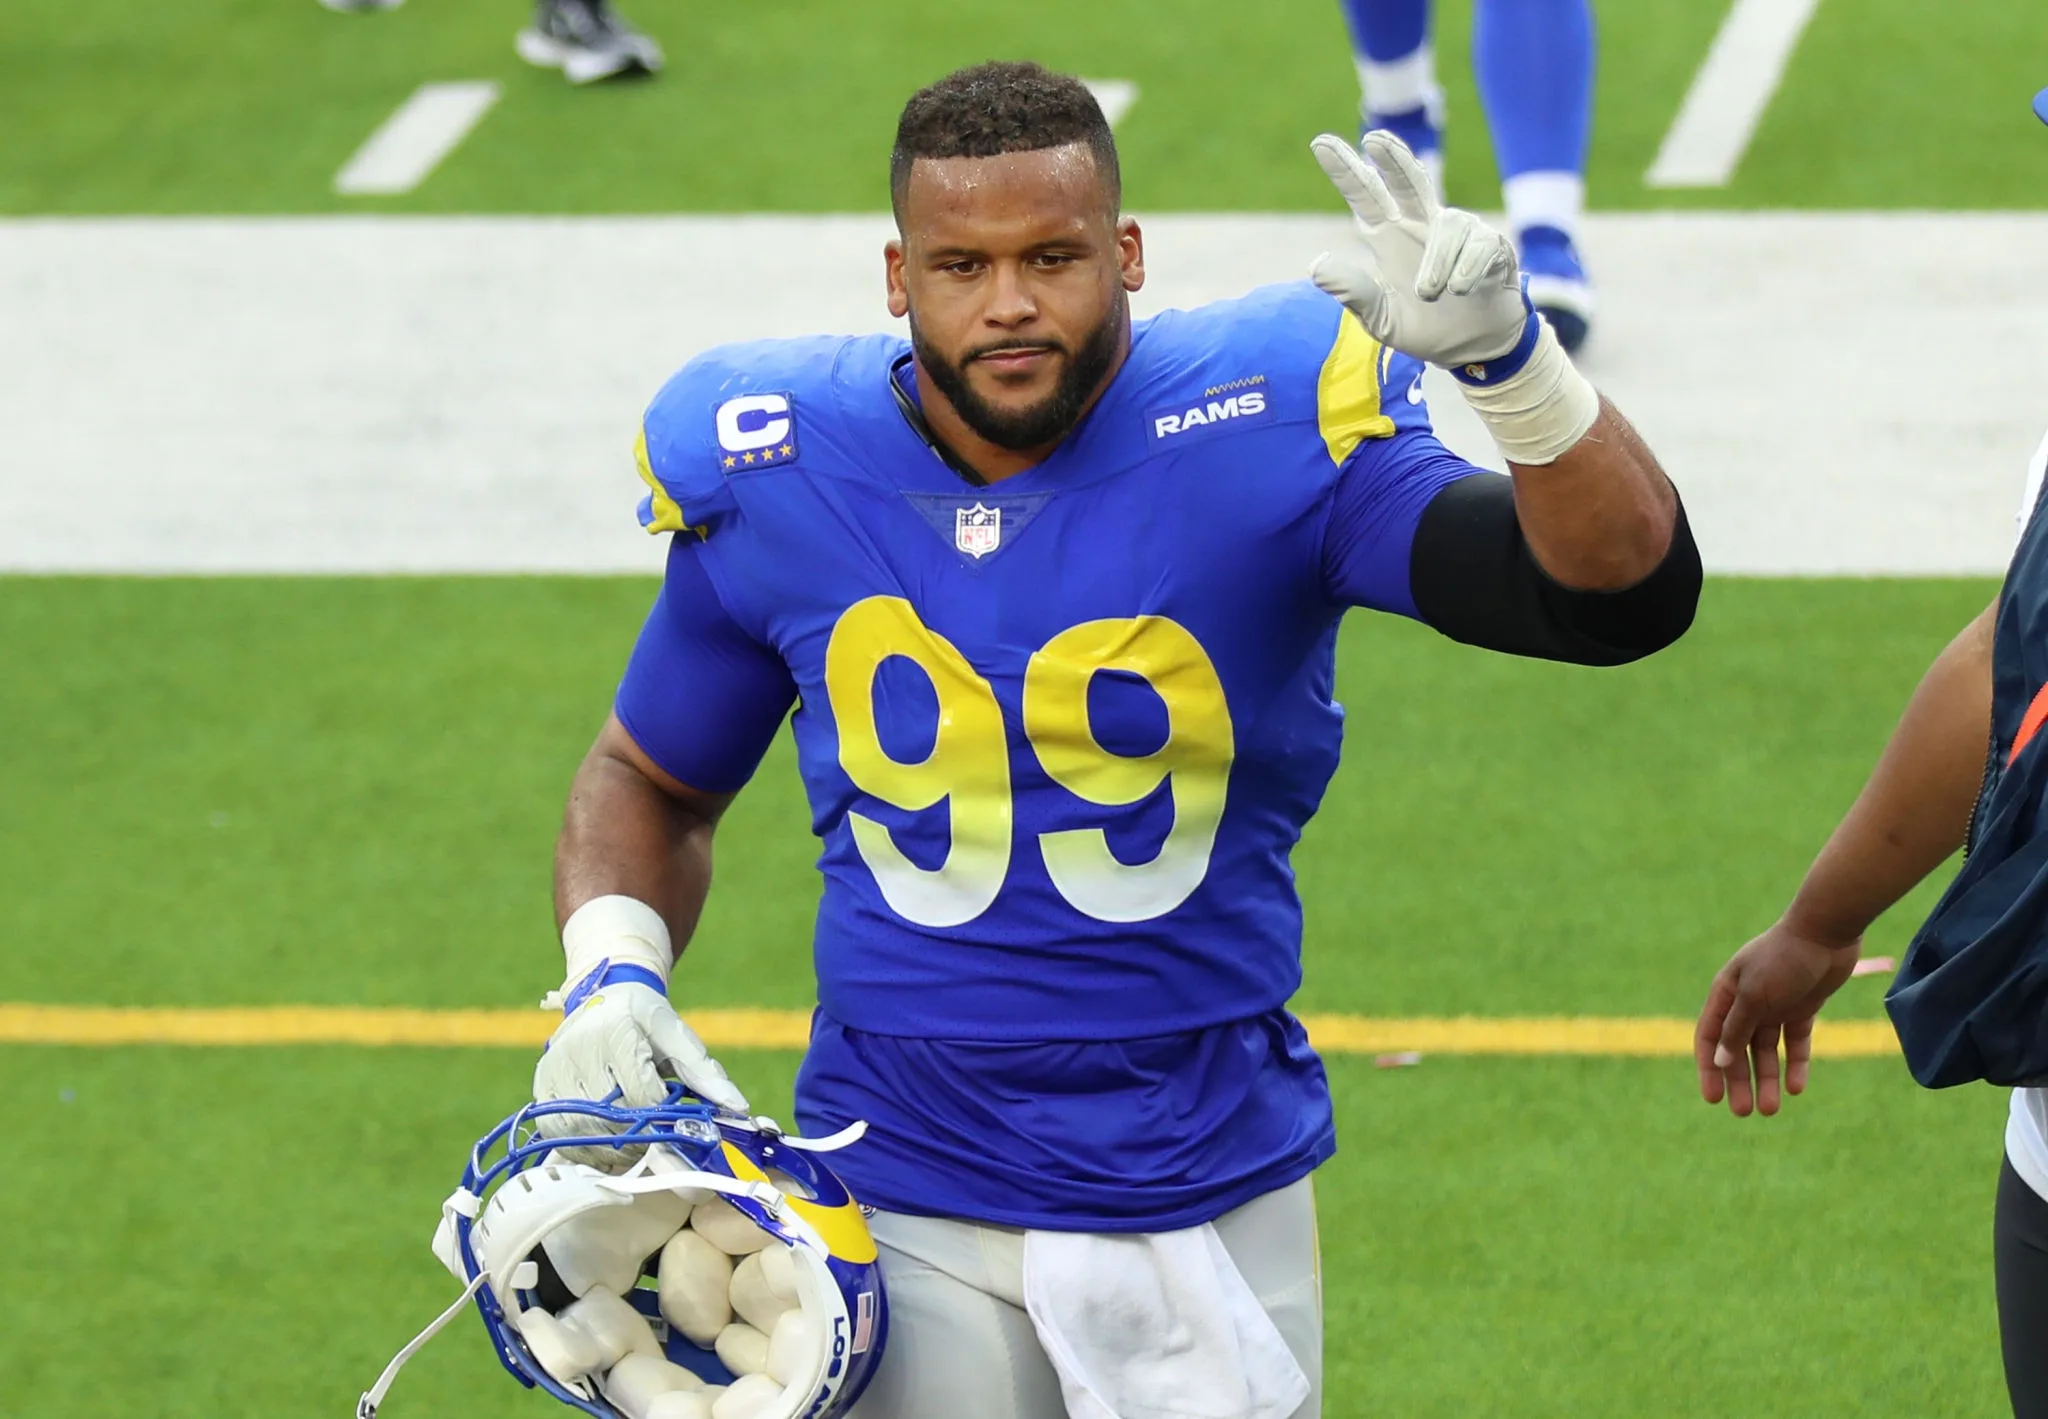 Los Angeles Rams defensive tackle Aaron Donald, one of the great defensive players ever, has retired. (Photo courtesy of GETTY IMAGES)